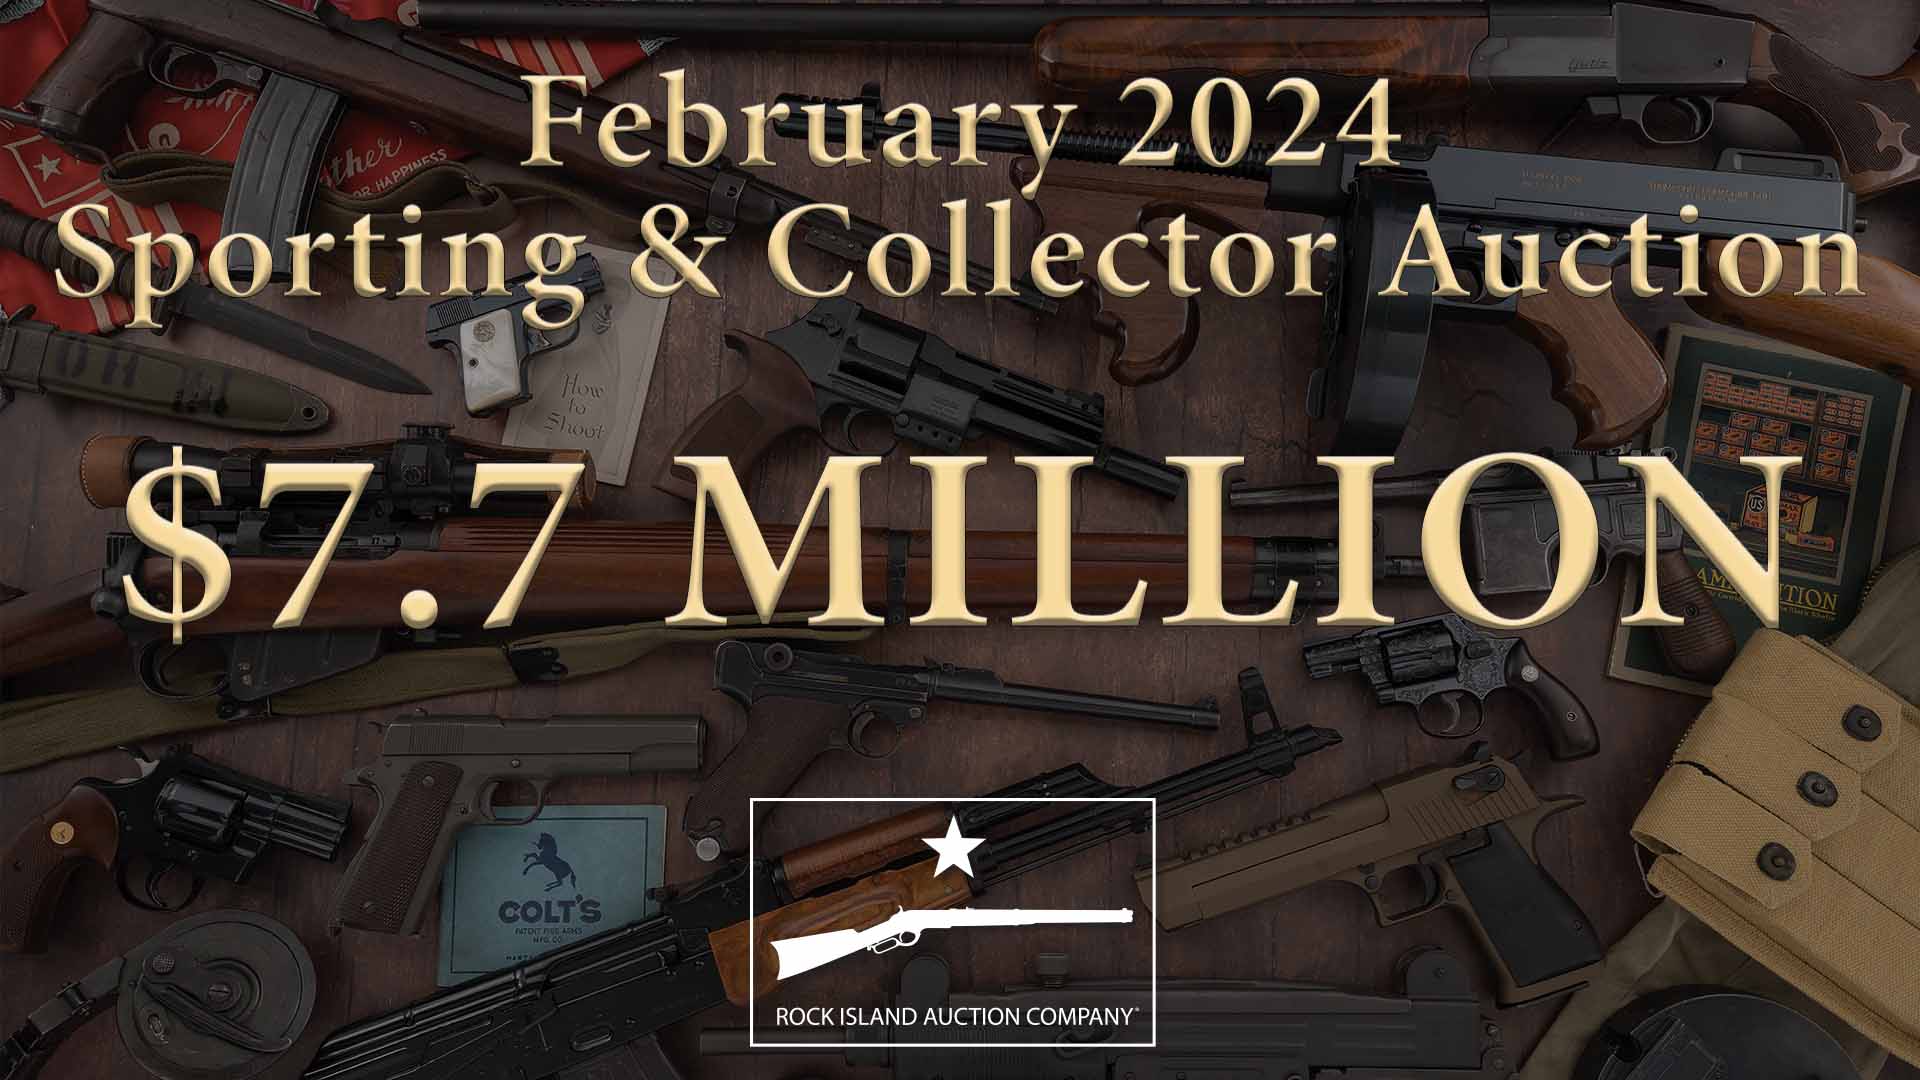 February Sporting & Collector Auction Realizes $7.7 Million